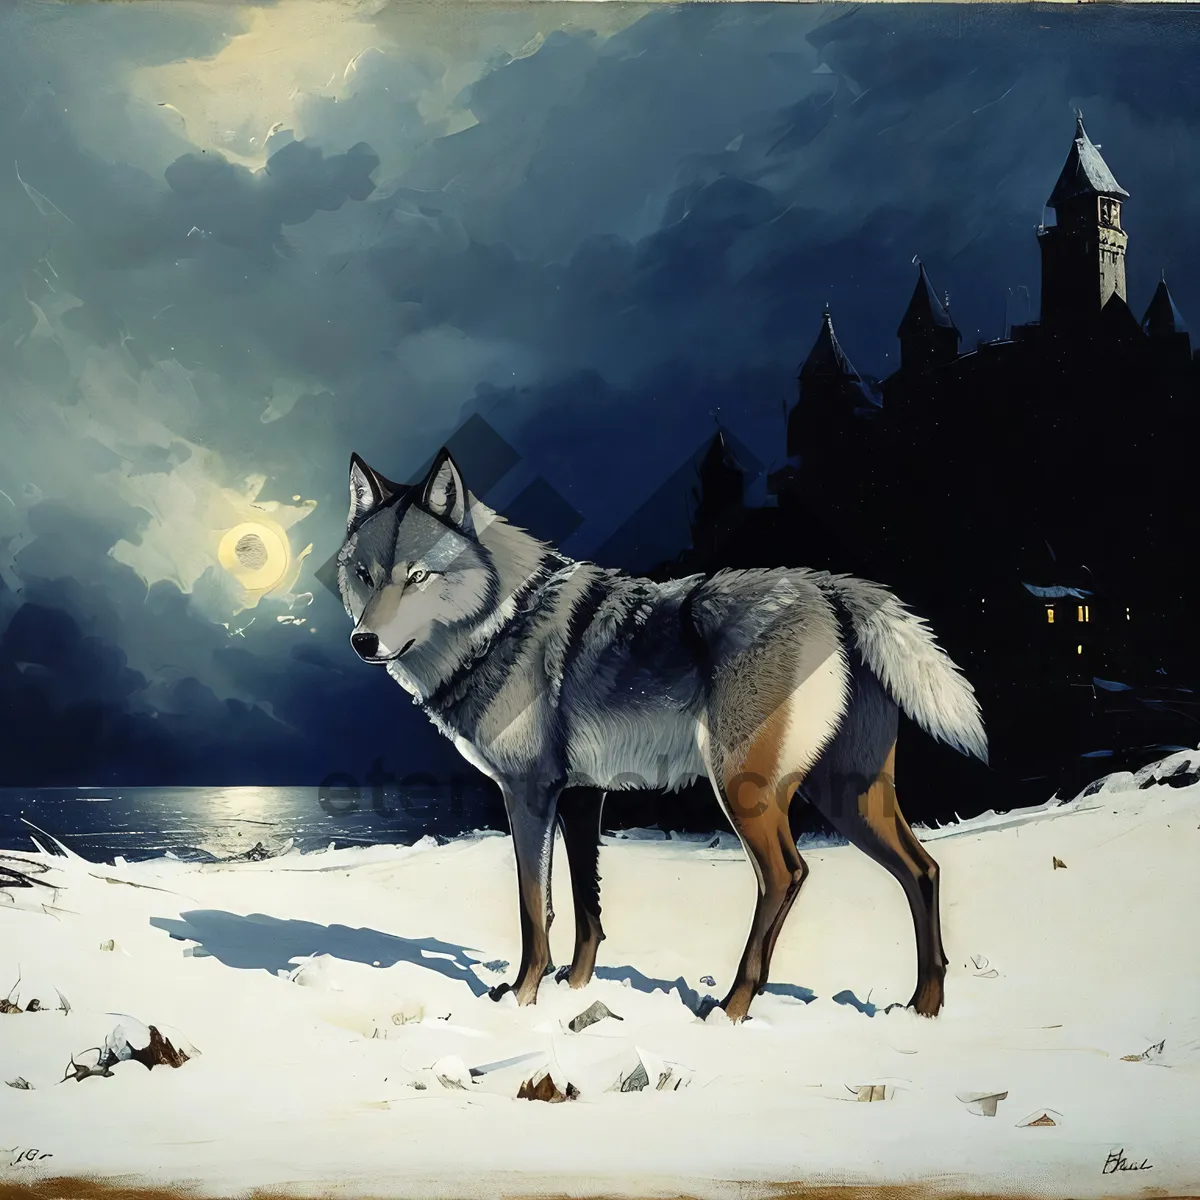 Picture of Winter Timber Wolf in Snowy Mountain Landscape